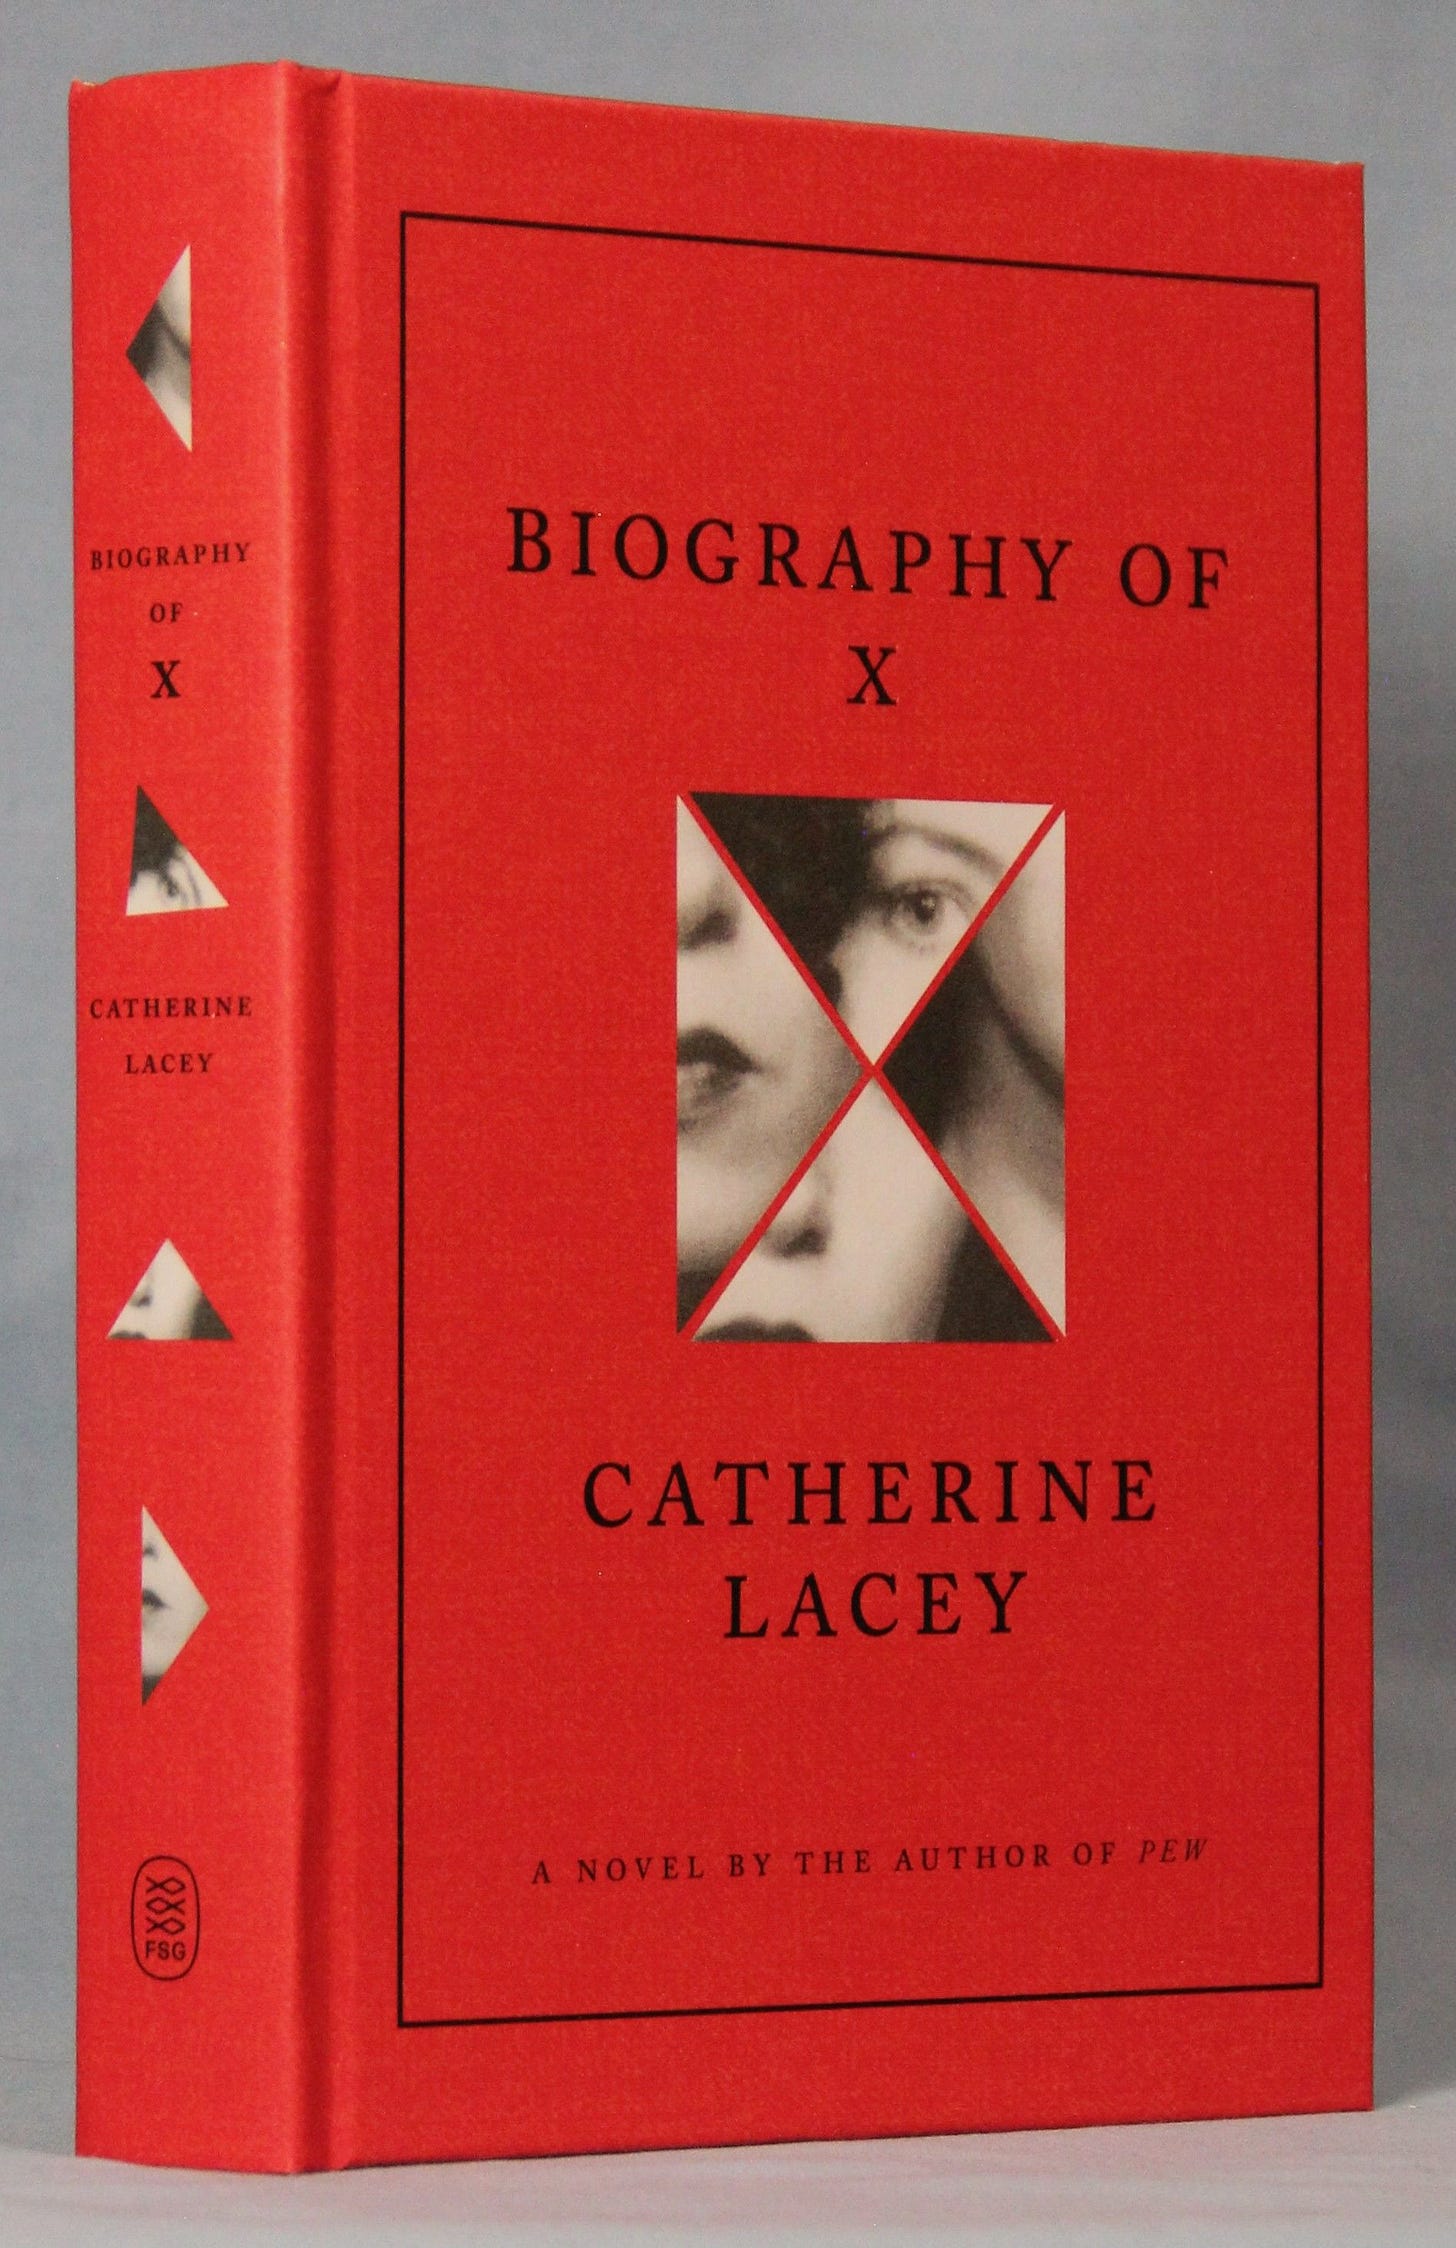 Biography of X (Signed on Title Page)